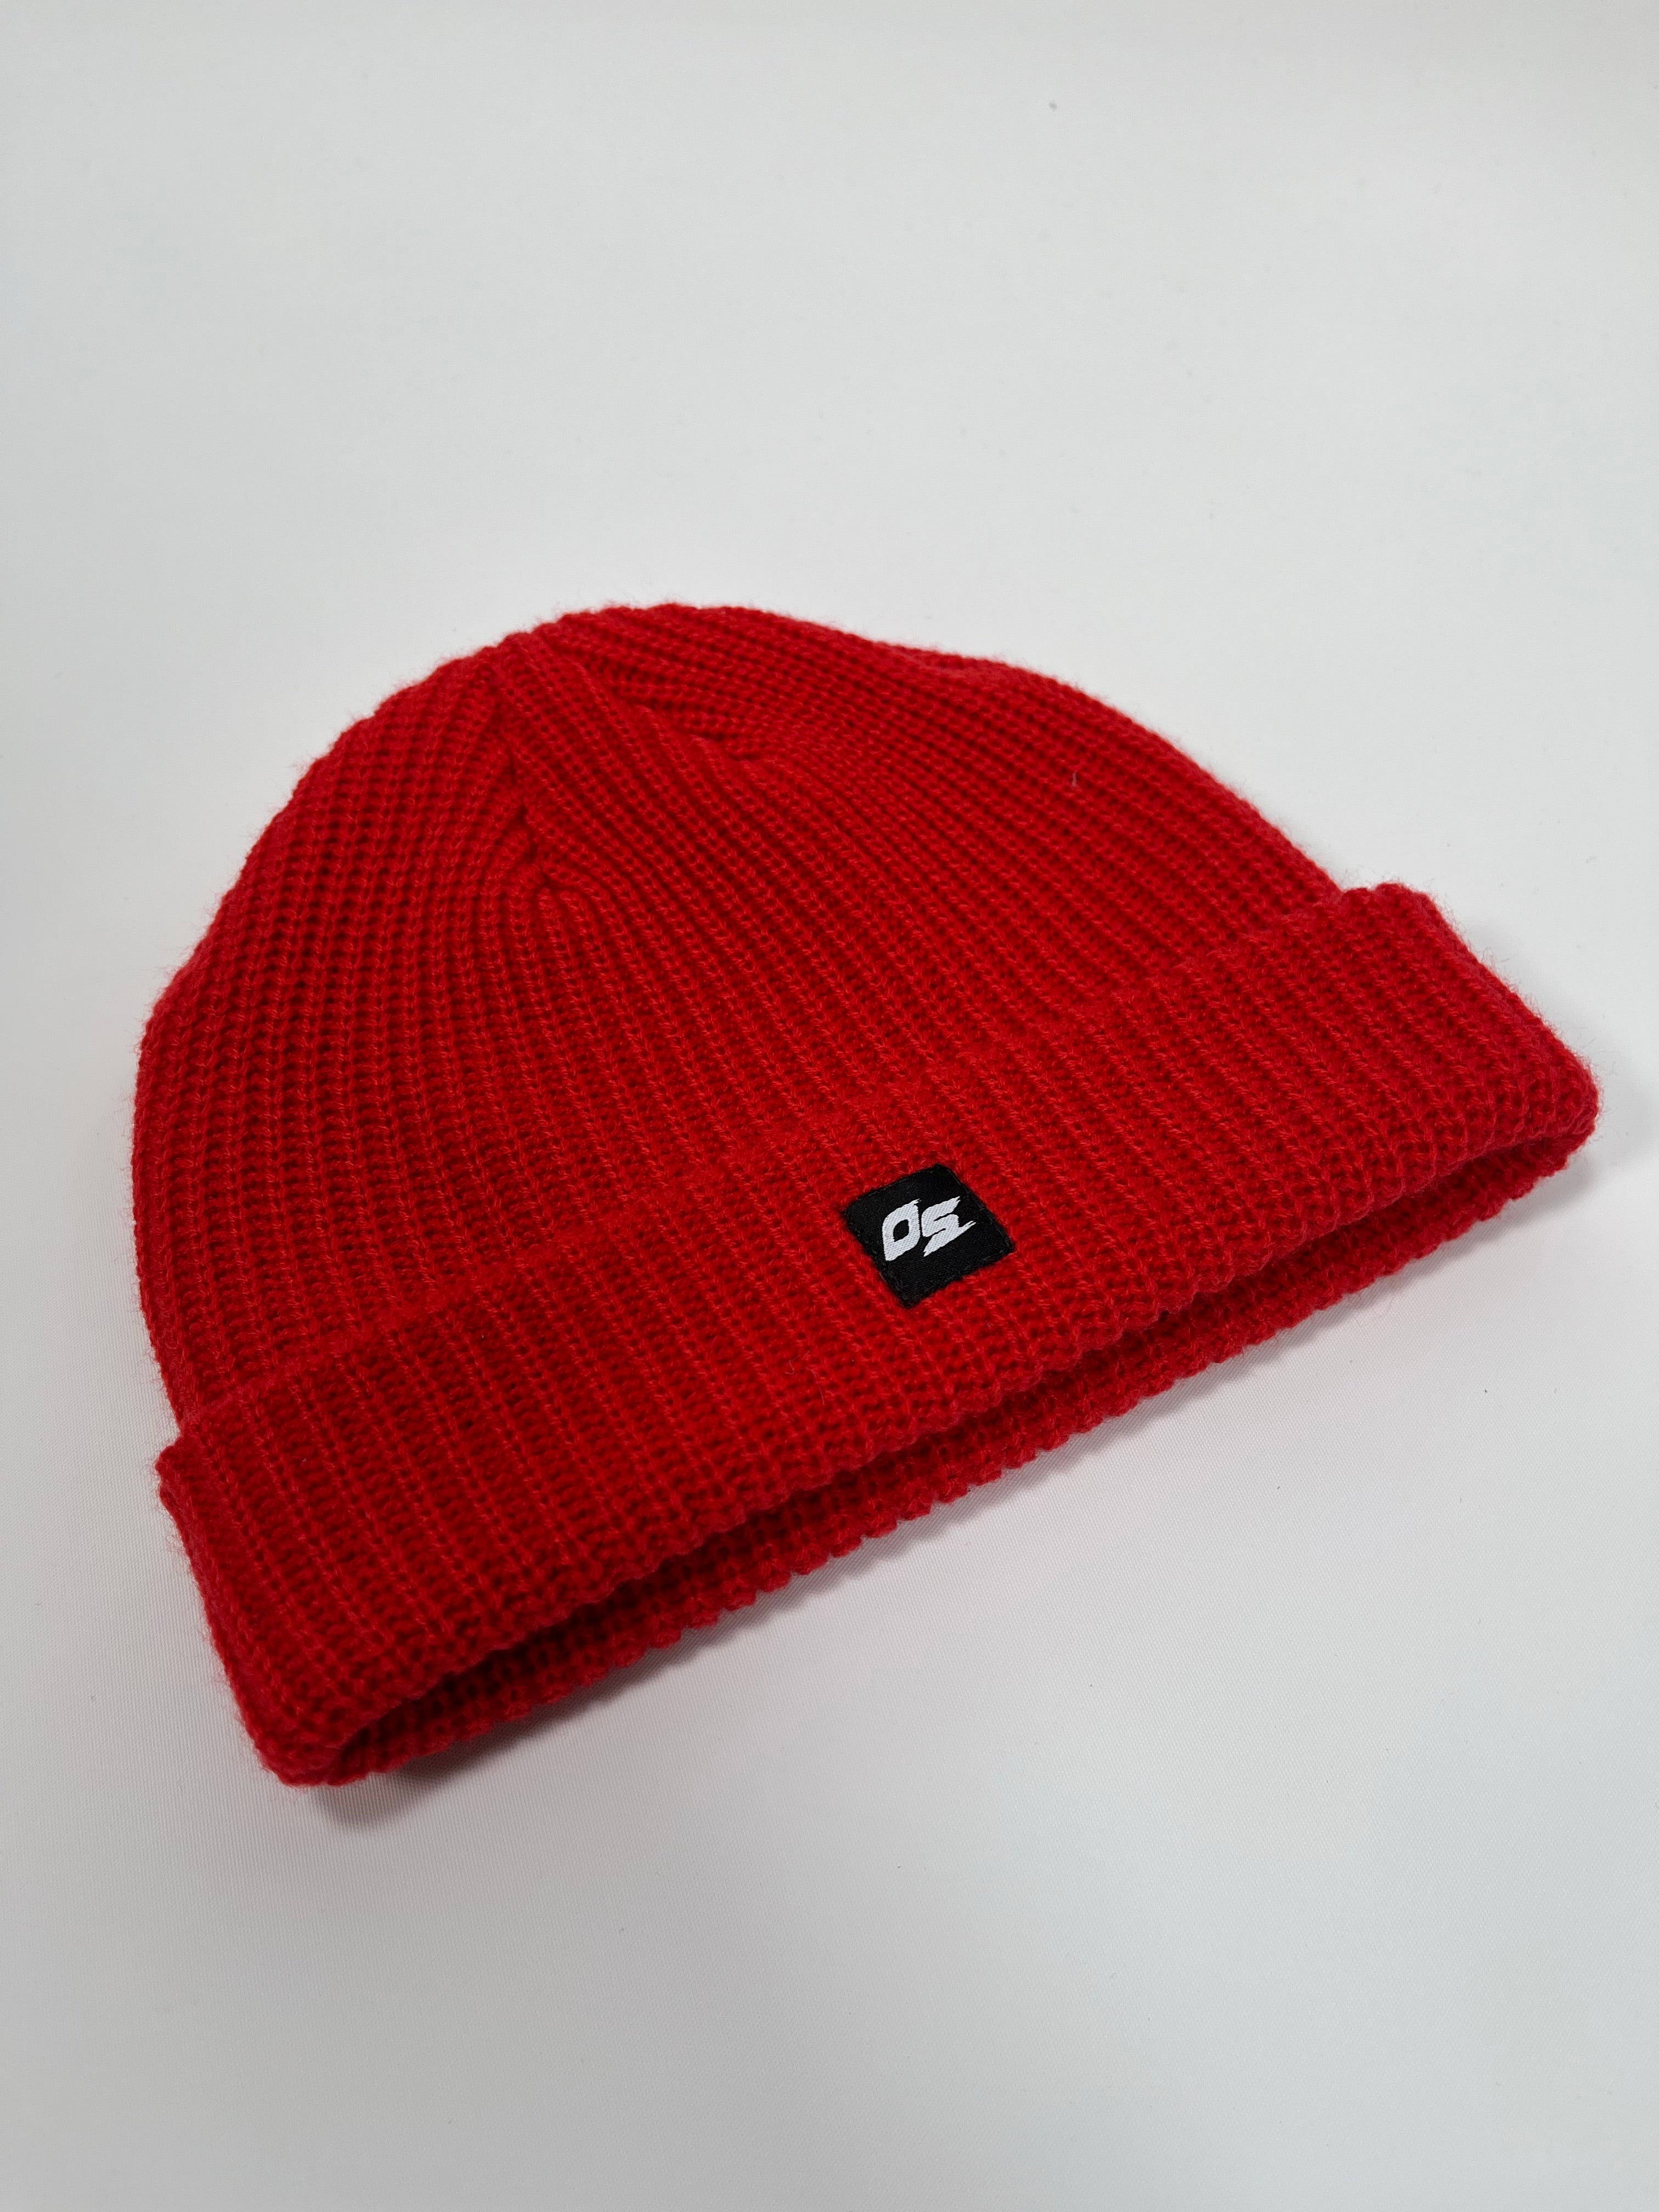 OS® CABLE BEANIE- – OTSDR red SPORTS